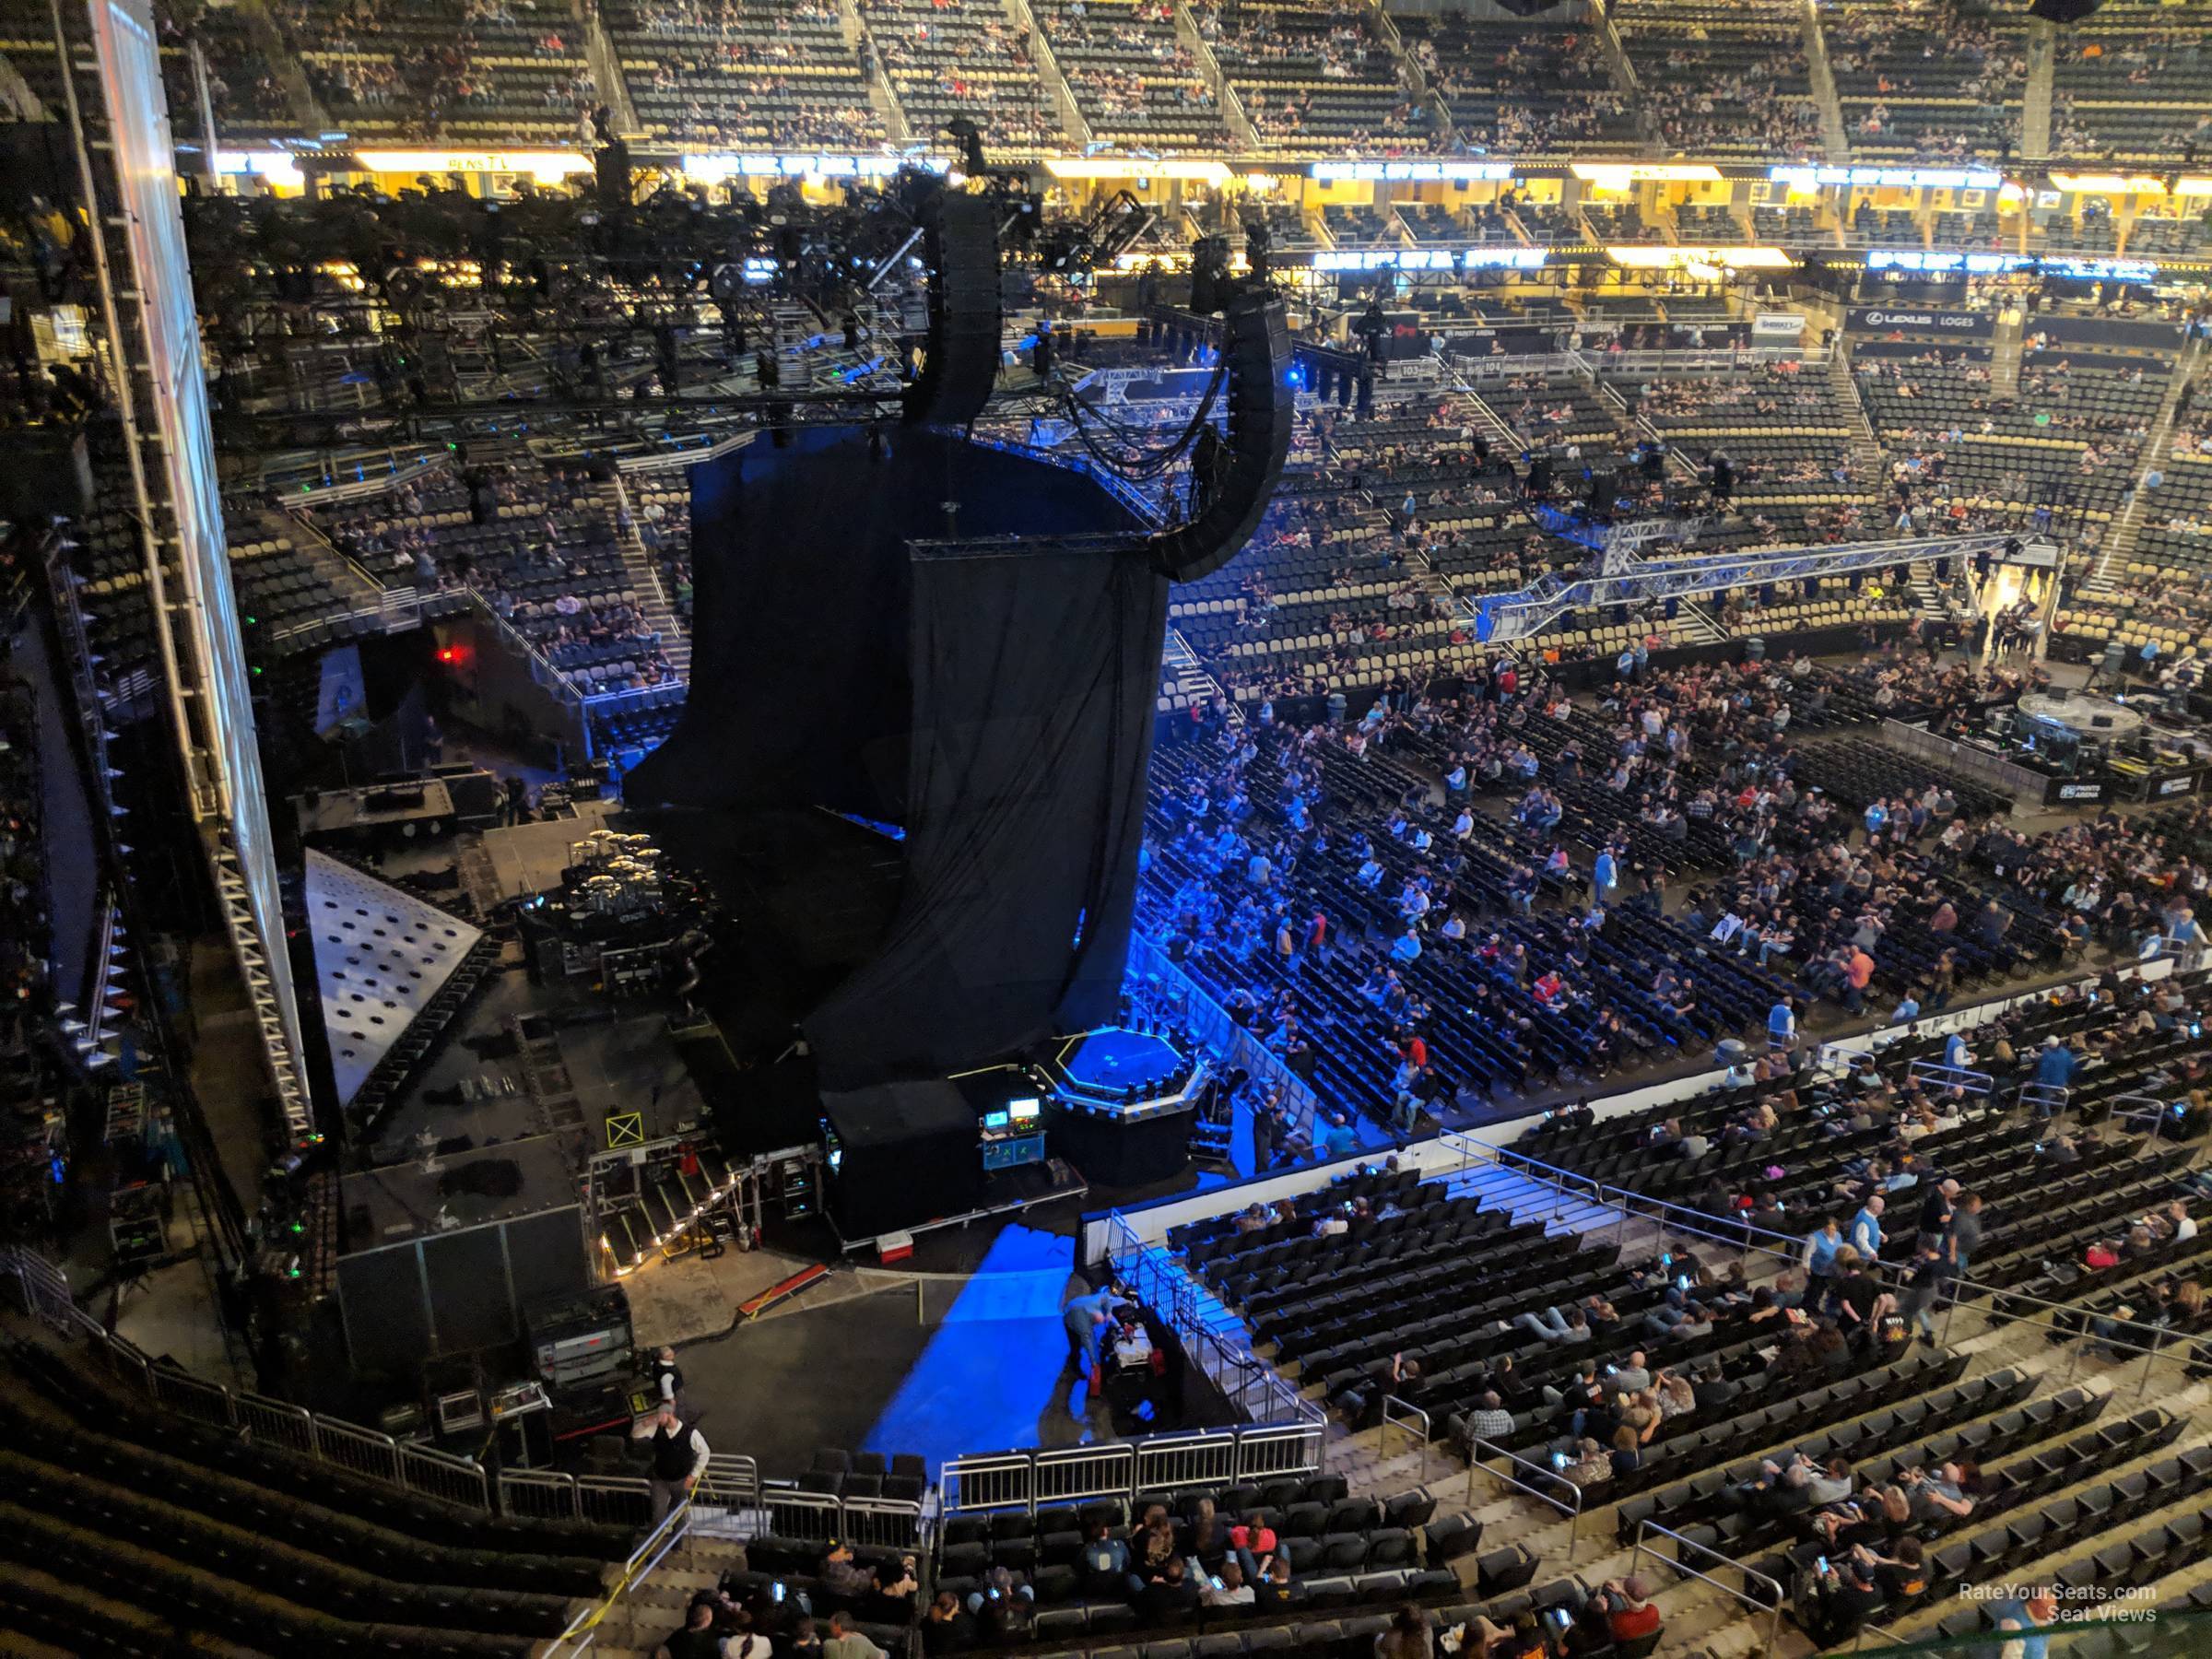 section 223, row c seat view  for concert - ppg paints arena